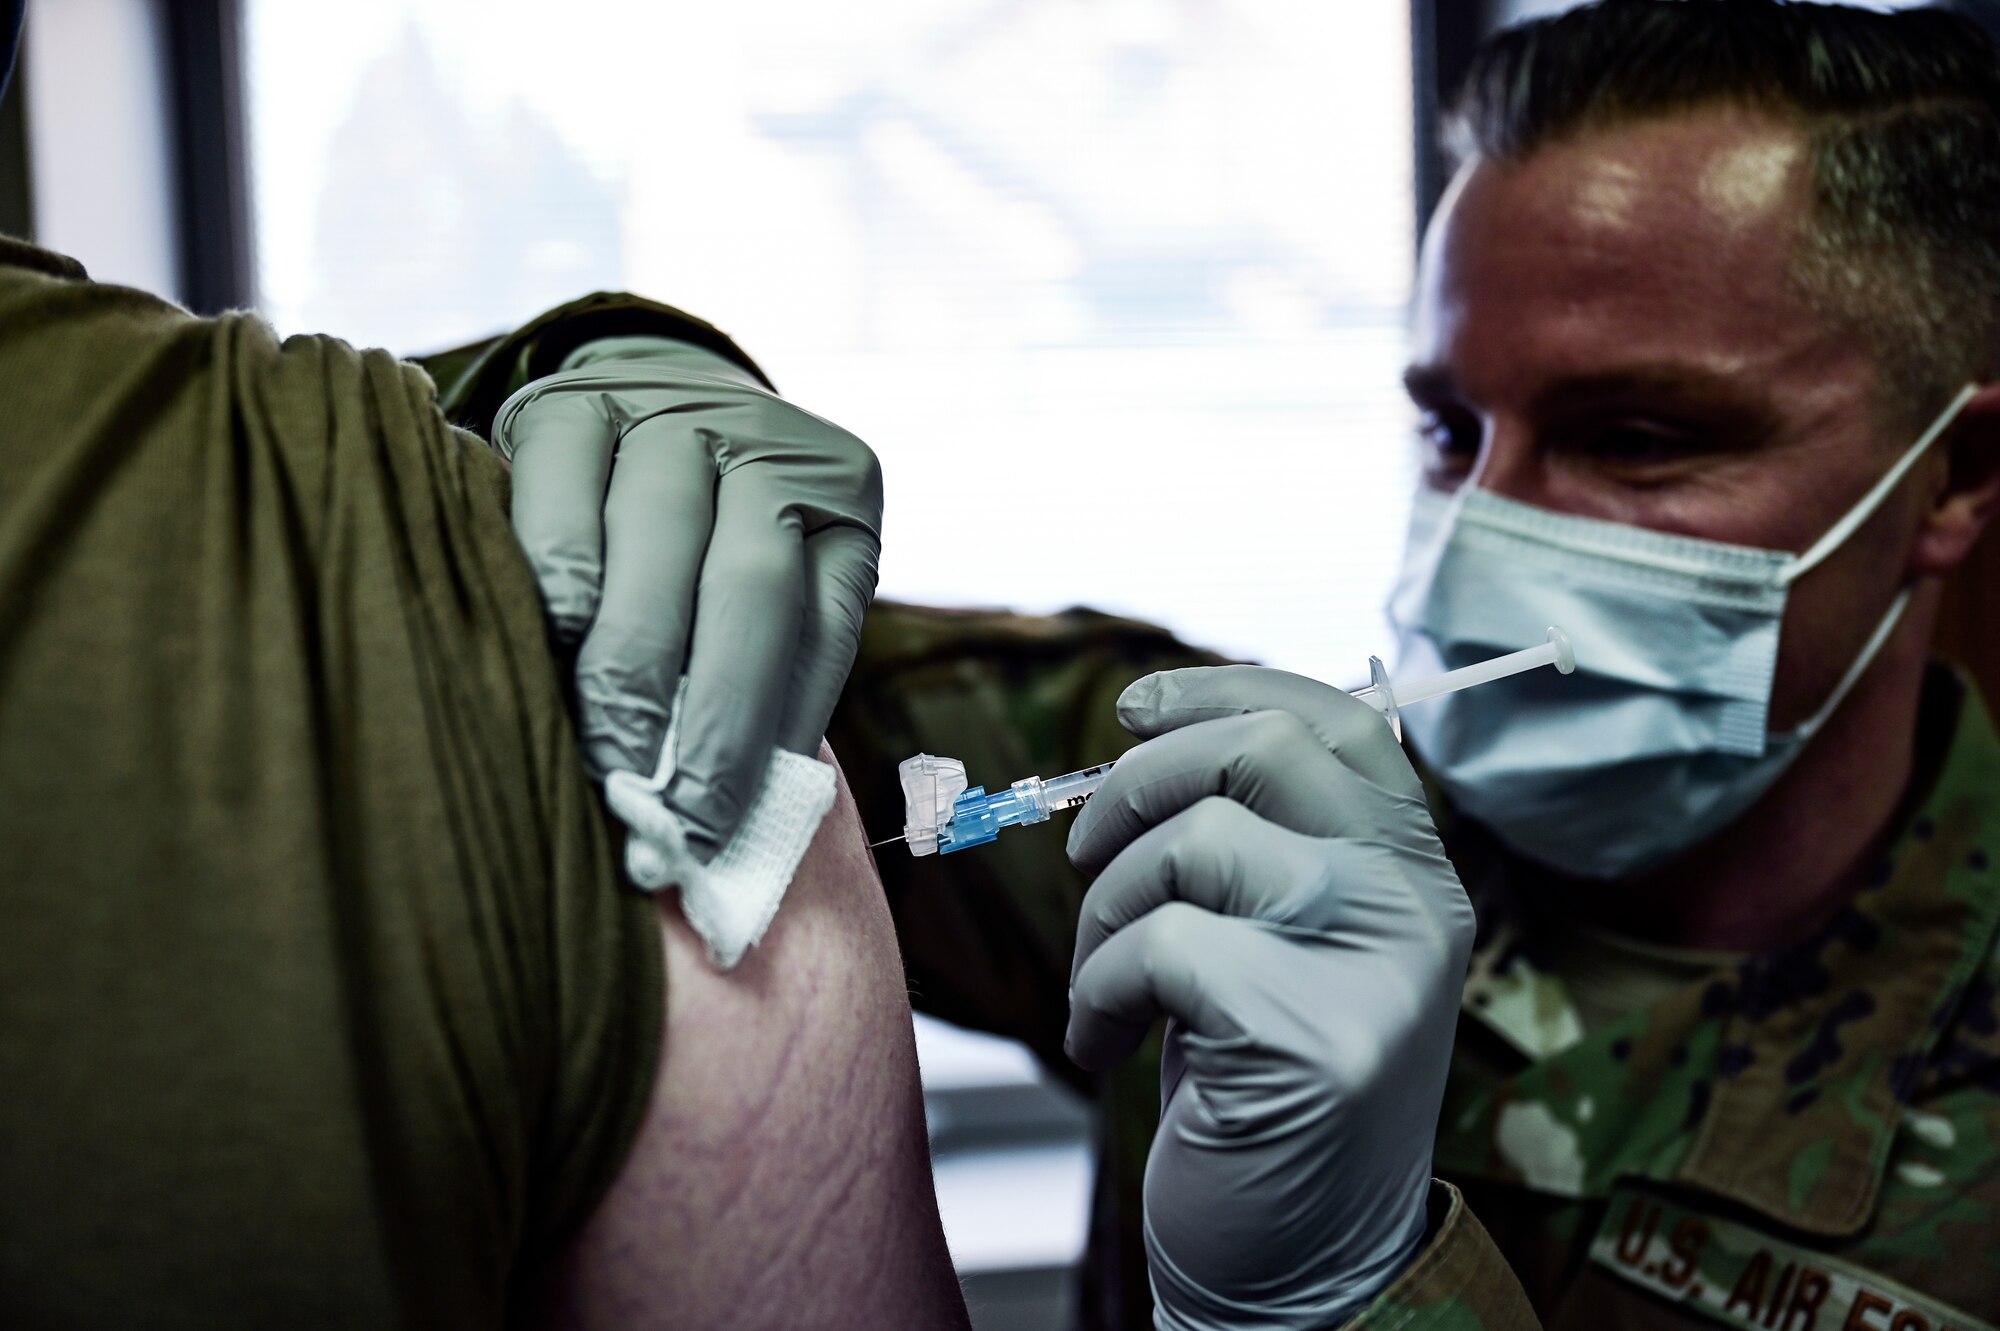 Tech. Sgt. Joseph Anthony, 911th Aeromedical Staging Squadron aeromedical technician, administers a COVID-19 vaccine to a member of the 911th Airlift Wing at the Pittsburgh International Airport Air Reserve Station, Pennsylvania, Feb. 4, 2021.